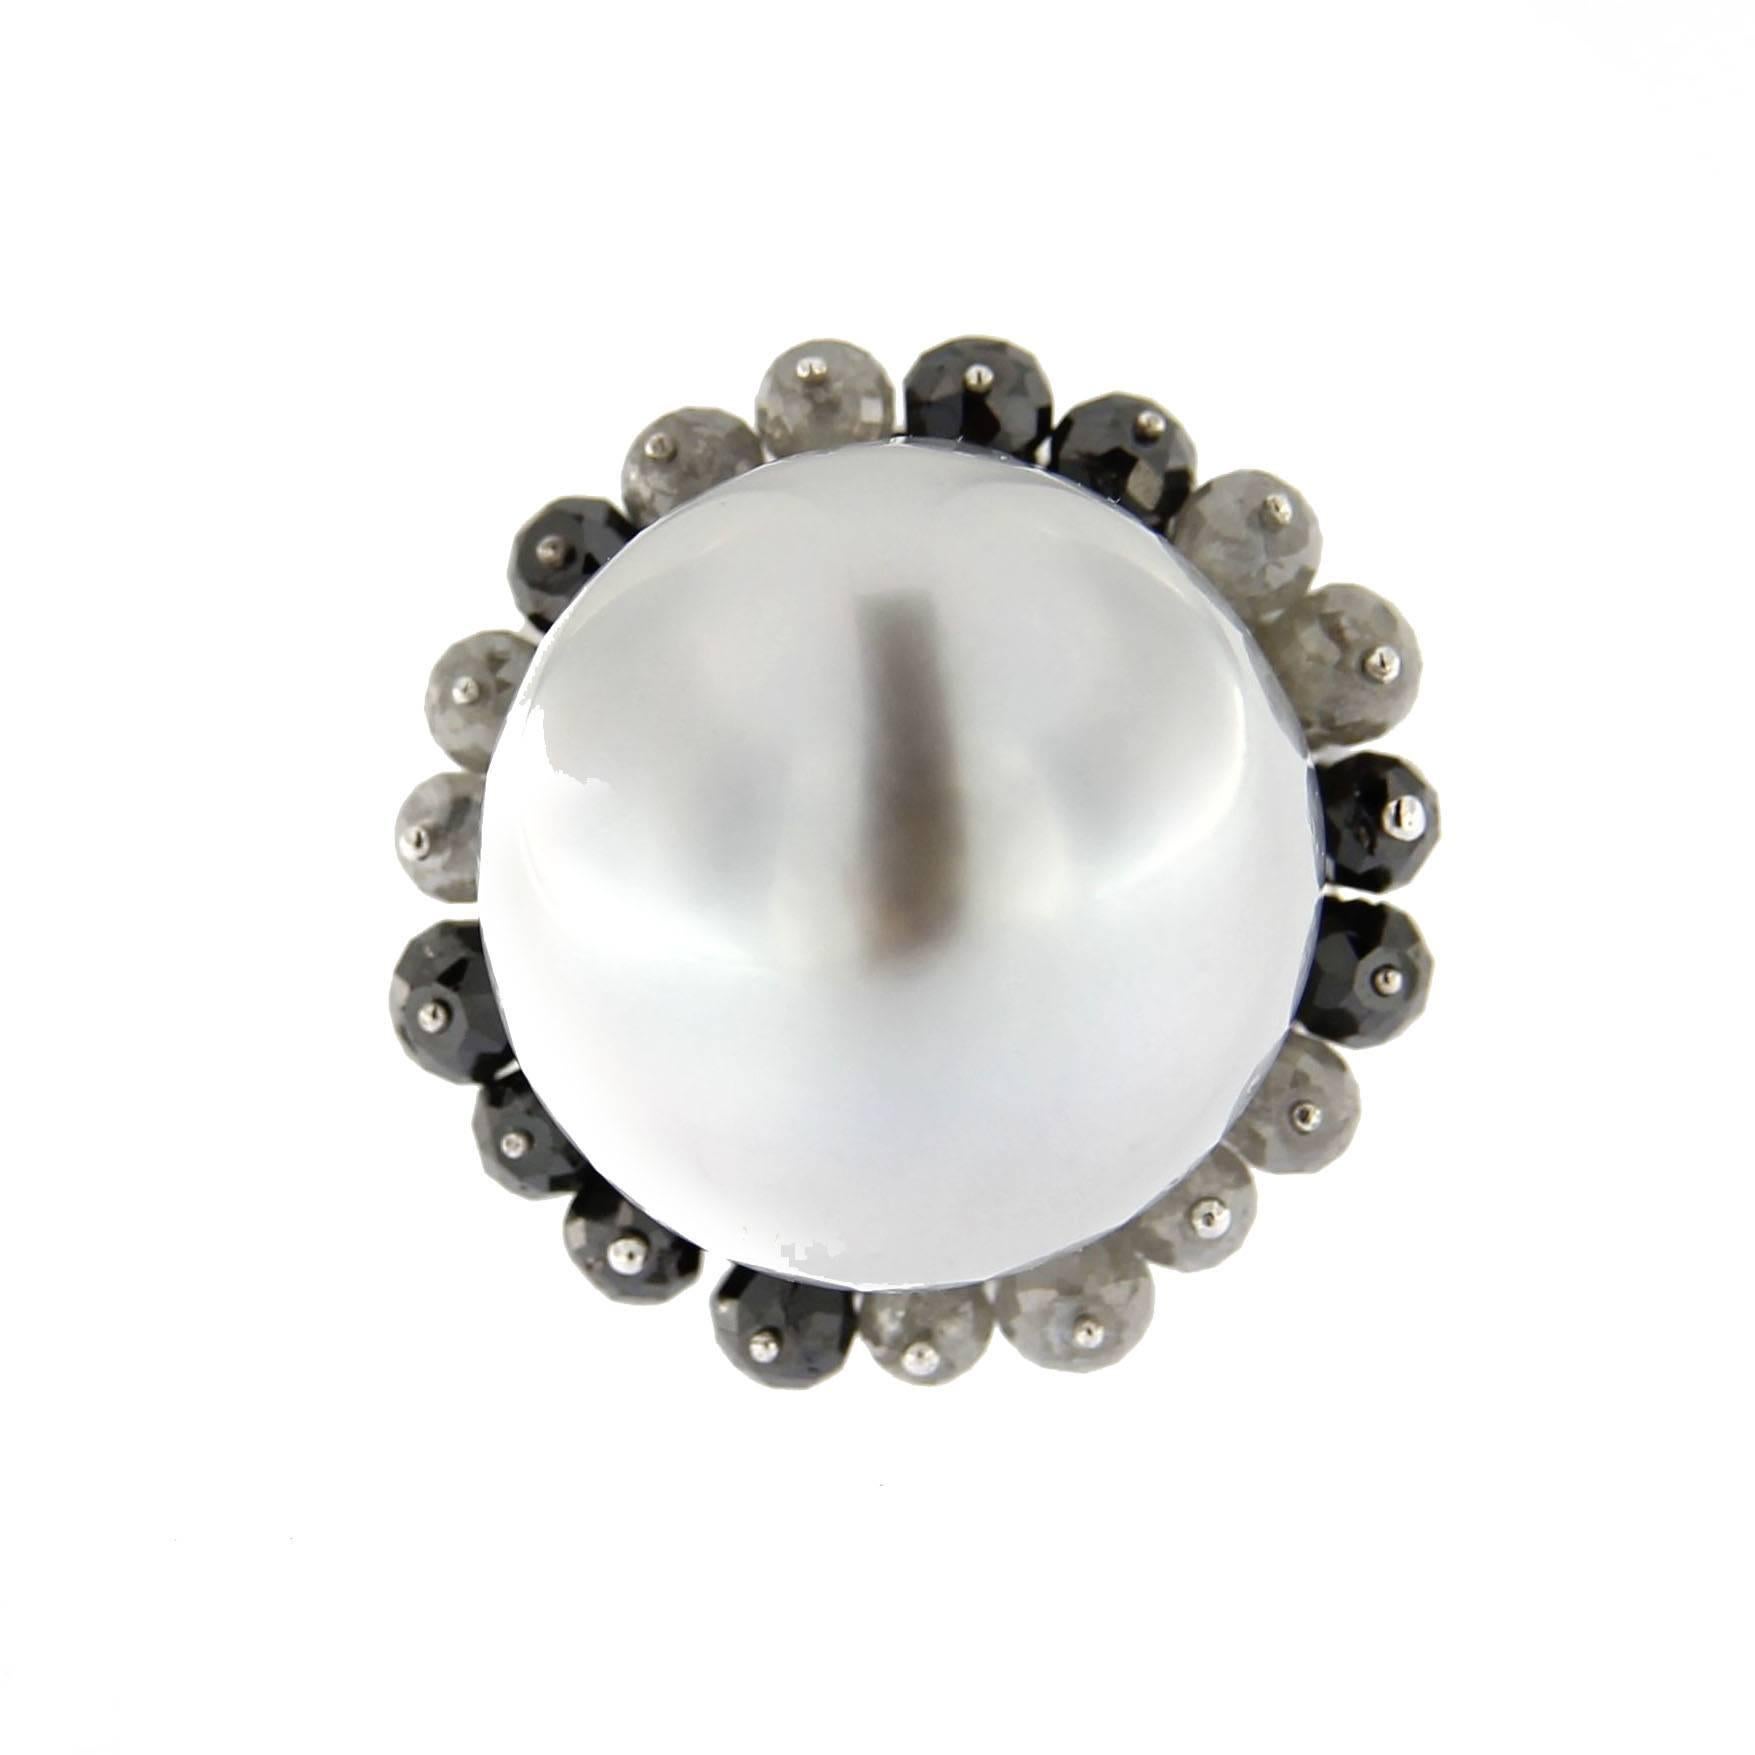 Jona design collection, handcrafted in Italy, 18k white gold dome ring centering a large white baroque south sea pearl surrounded by black & ice grey briolette cut diamonds. Signed Jona.
US size 6.2 (can be sized).

All Jona jewelry is new